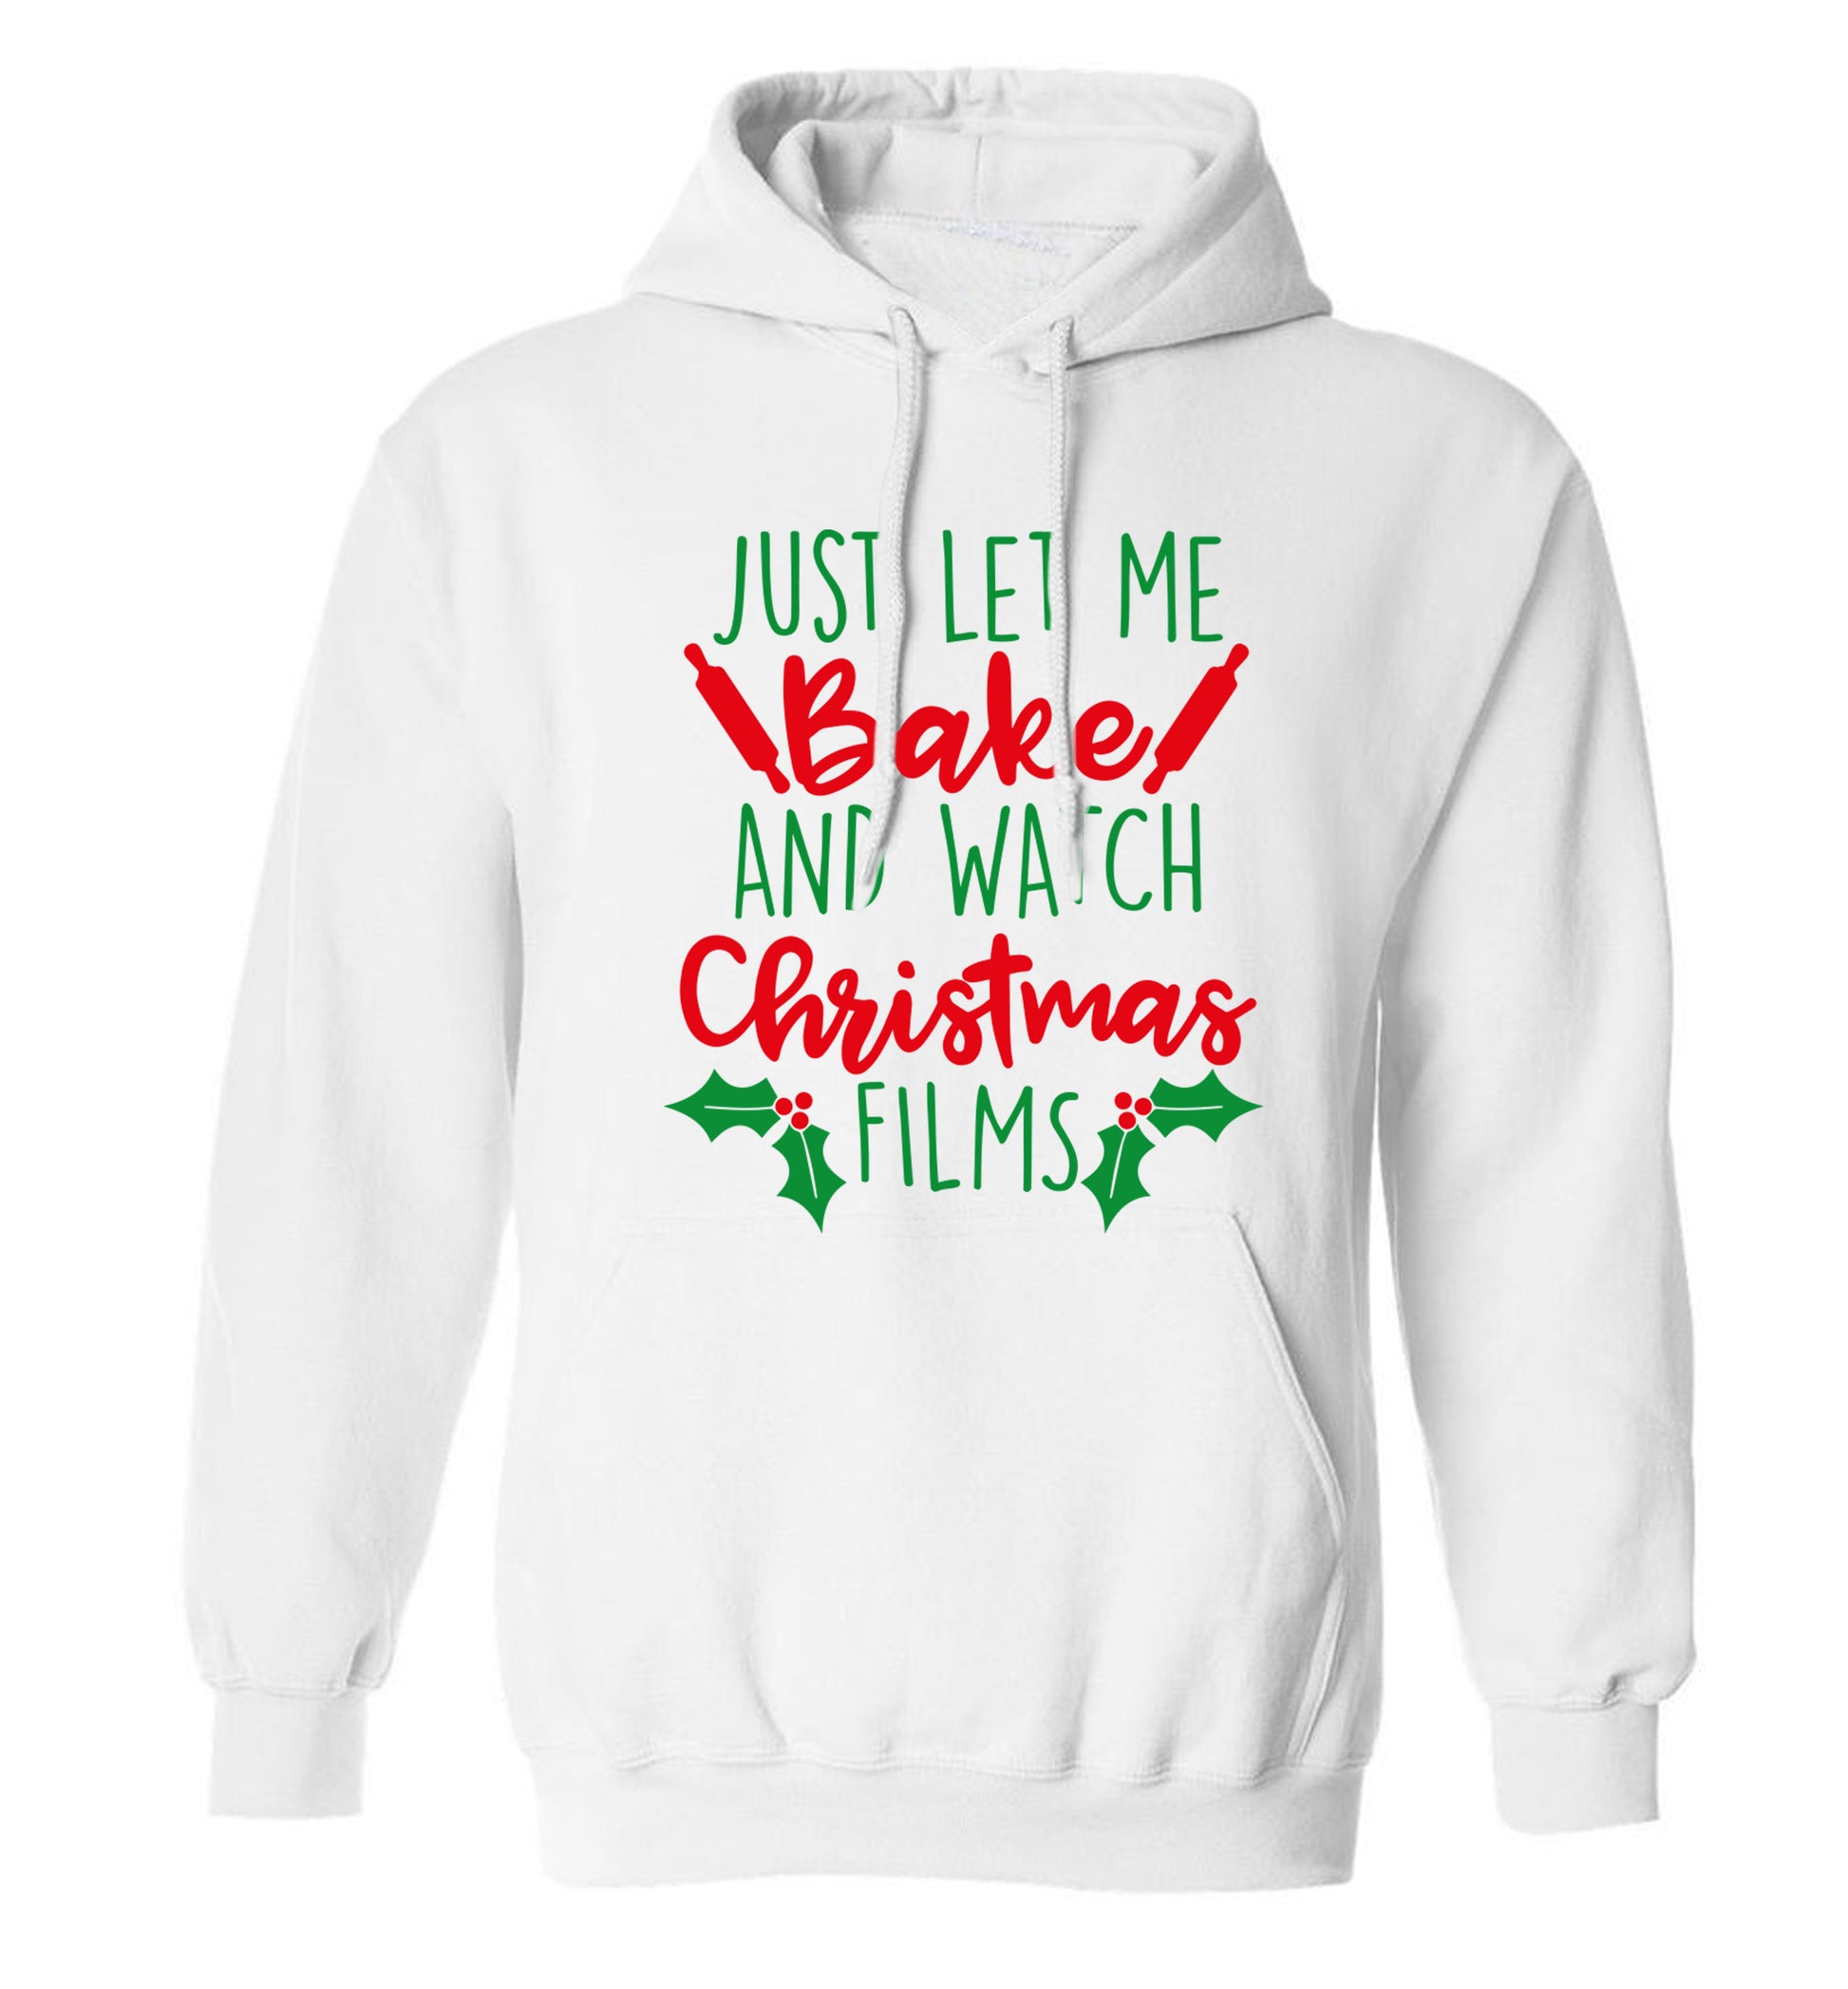 Just let me bake and watch Christmas films adults unisex white hoodie 2XL